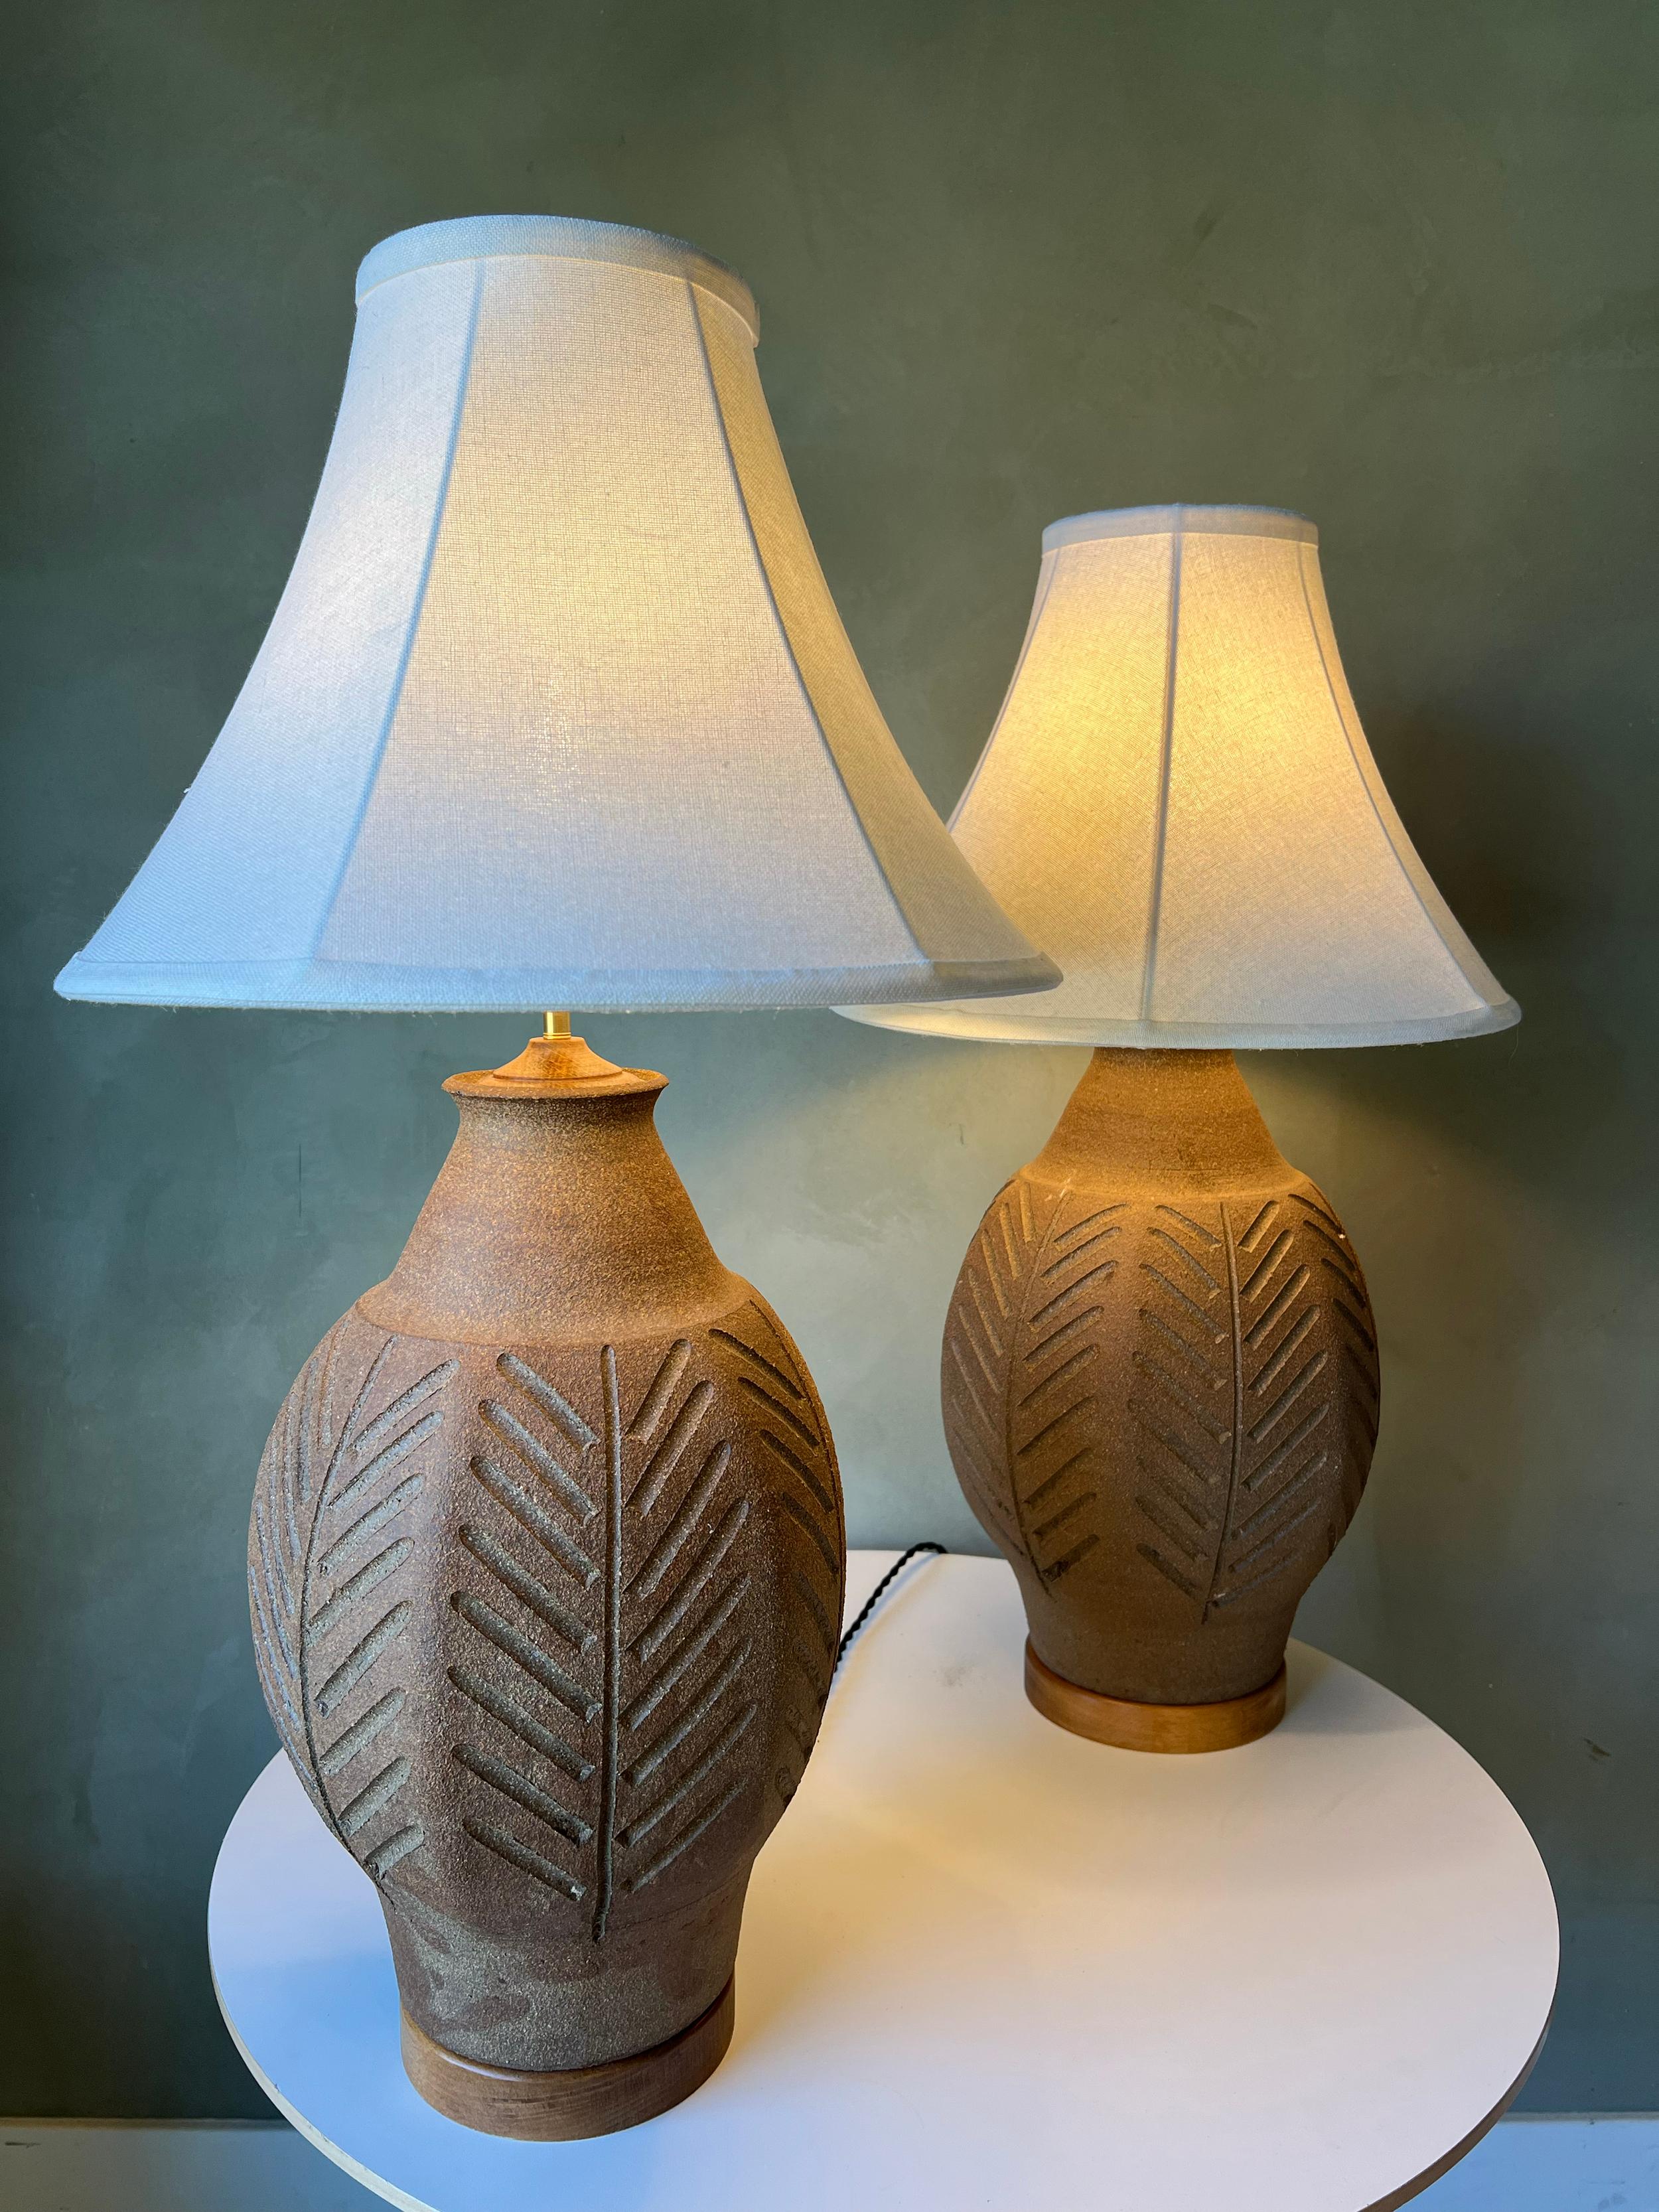 Pair of fluted stoneware table lamps by California modernist Brent Bennett. These lamps have been rewired, have new linen shades, and are ready for use. Beautiful fluted pattern that surrounds the vase. No chips or cracks on these vintage lamps. 